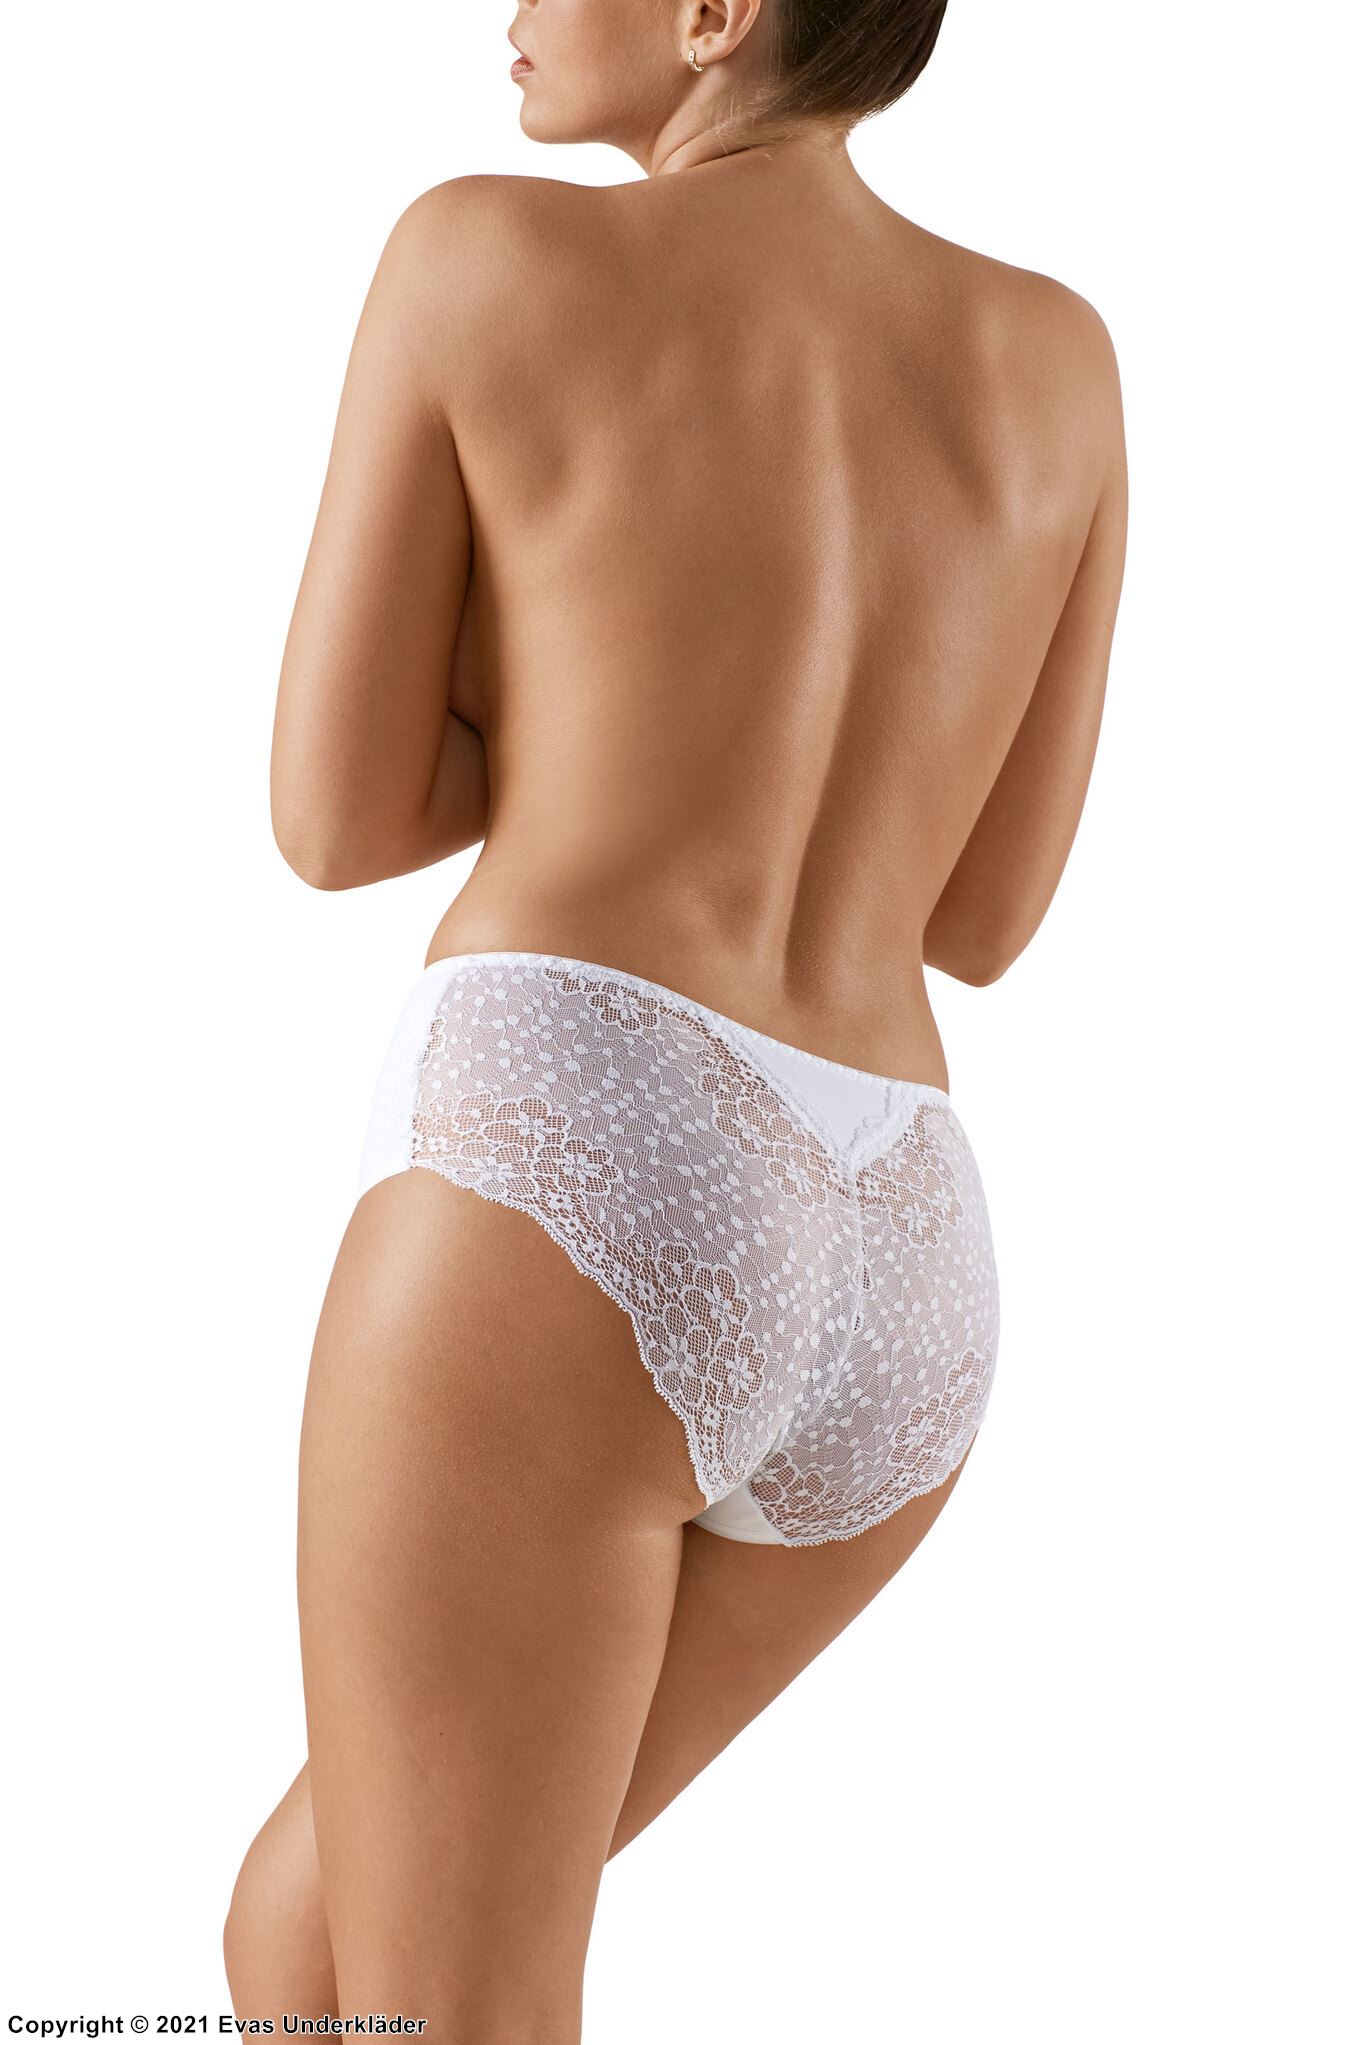 Romantic panties, high quality cotton, high waist, floral lace, S to 2XL